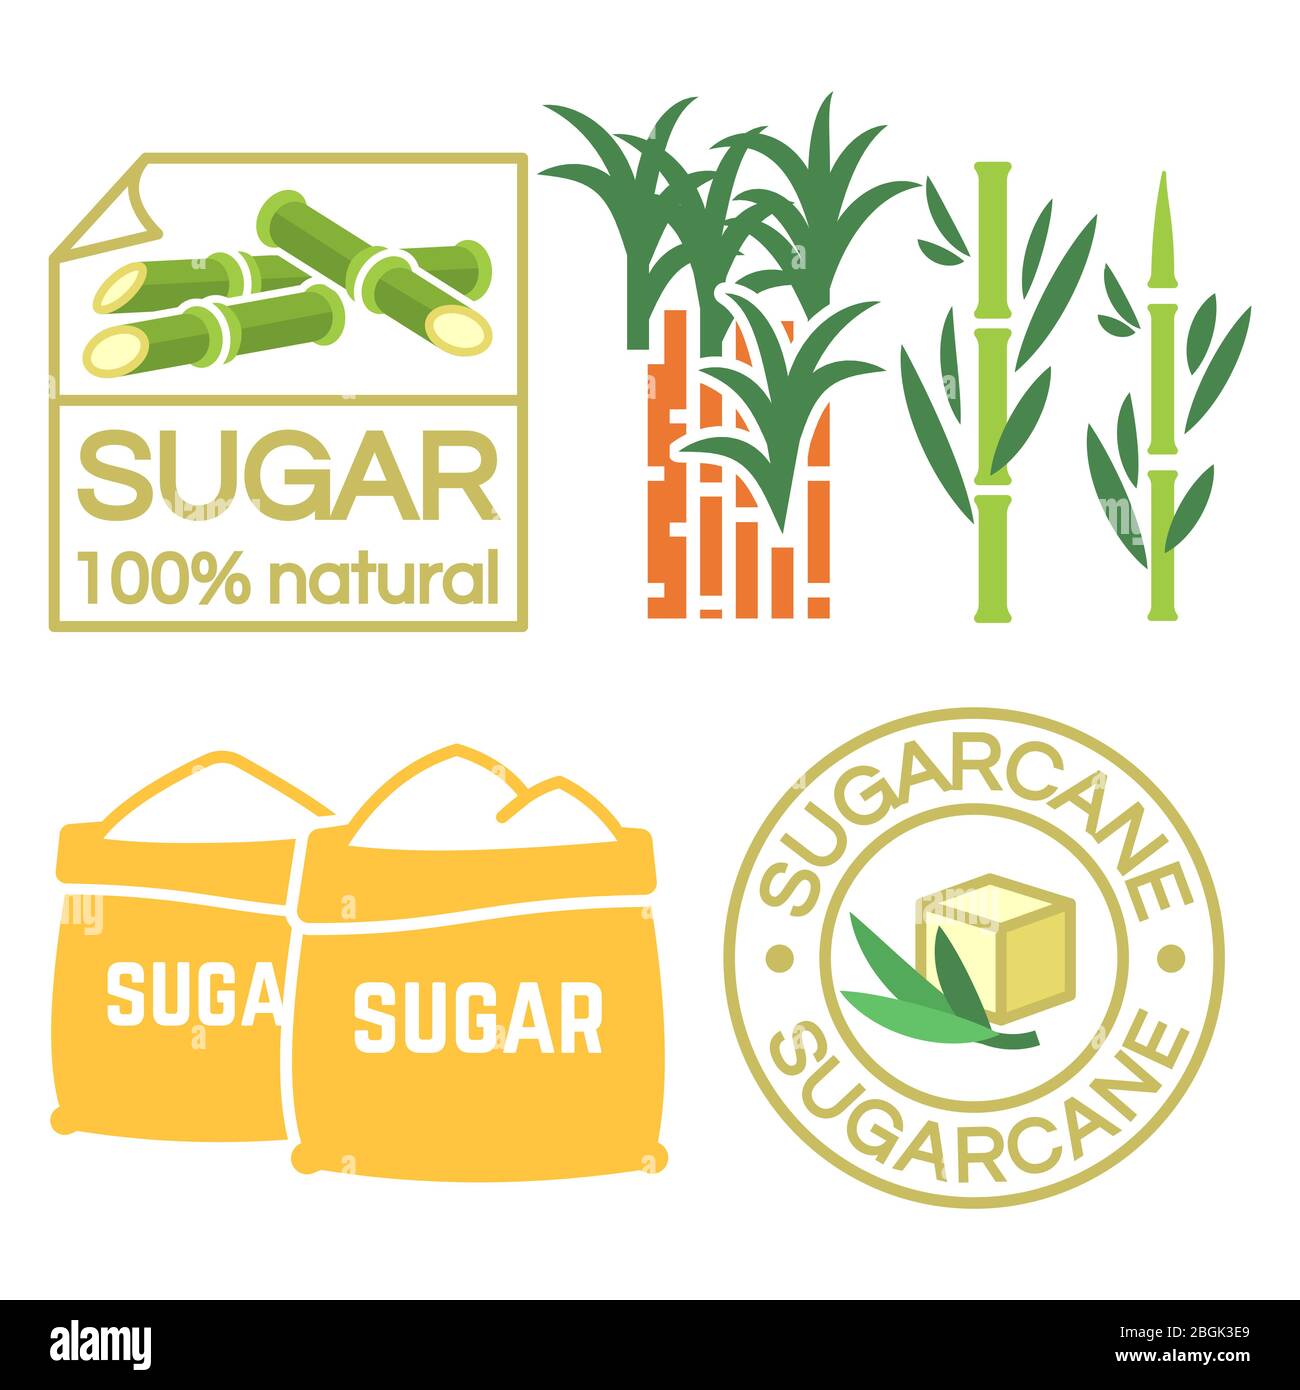 Sugar and sugar cane labels, icons isolated on white vector illustration Stock Vector